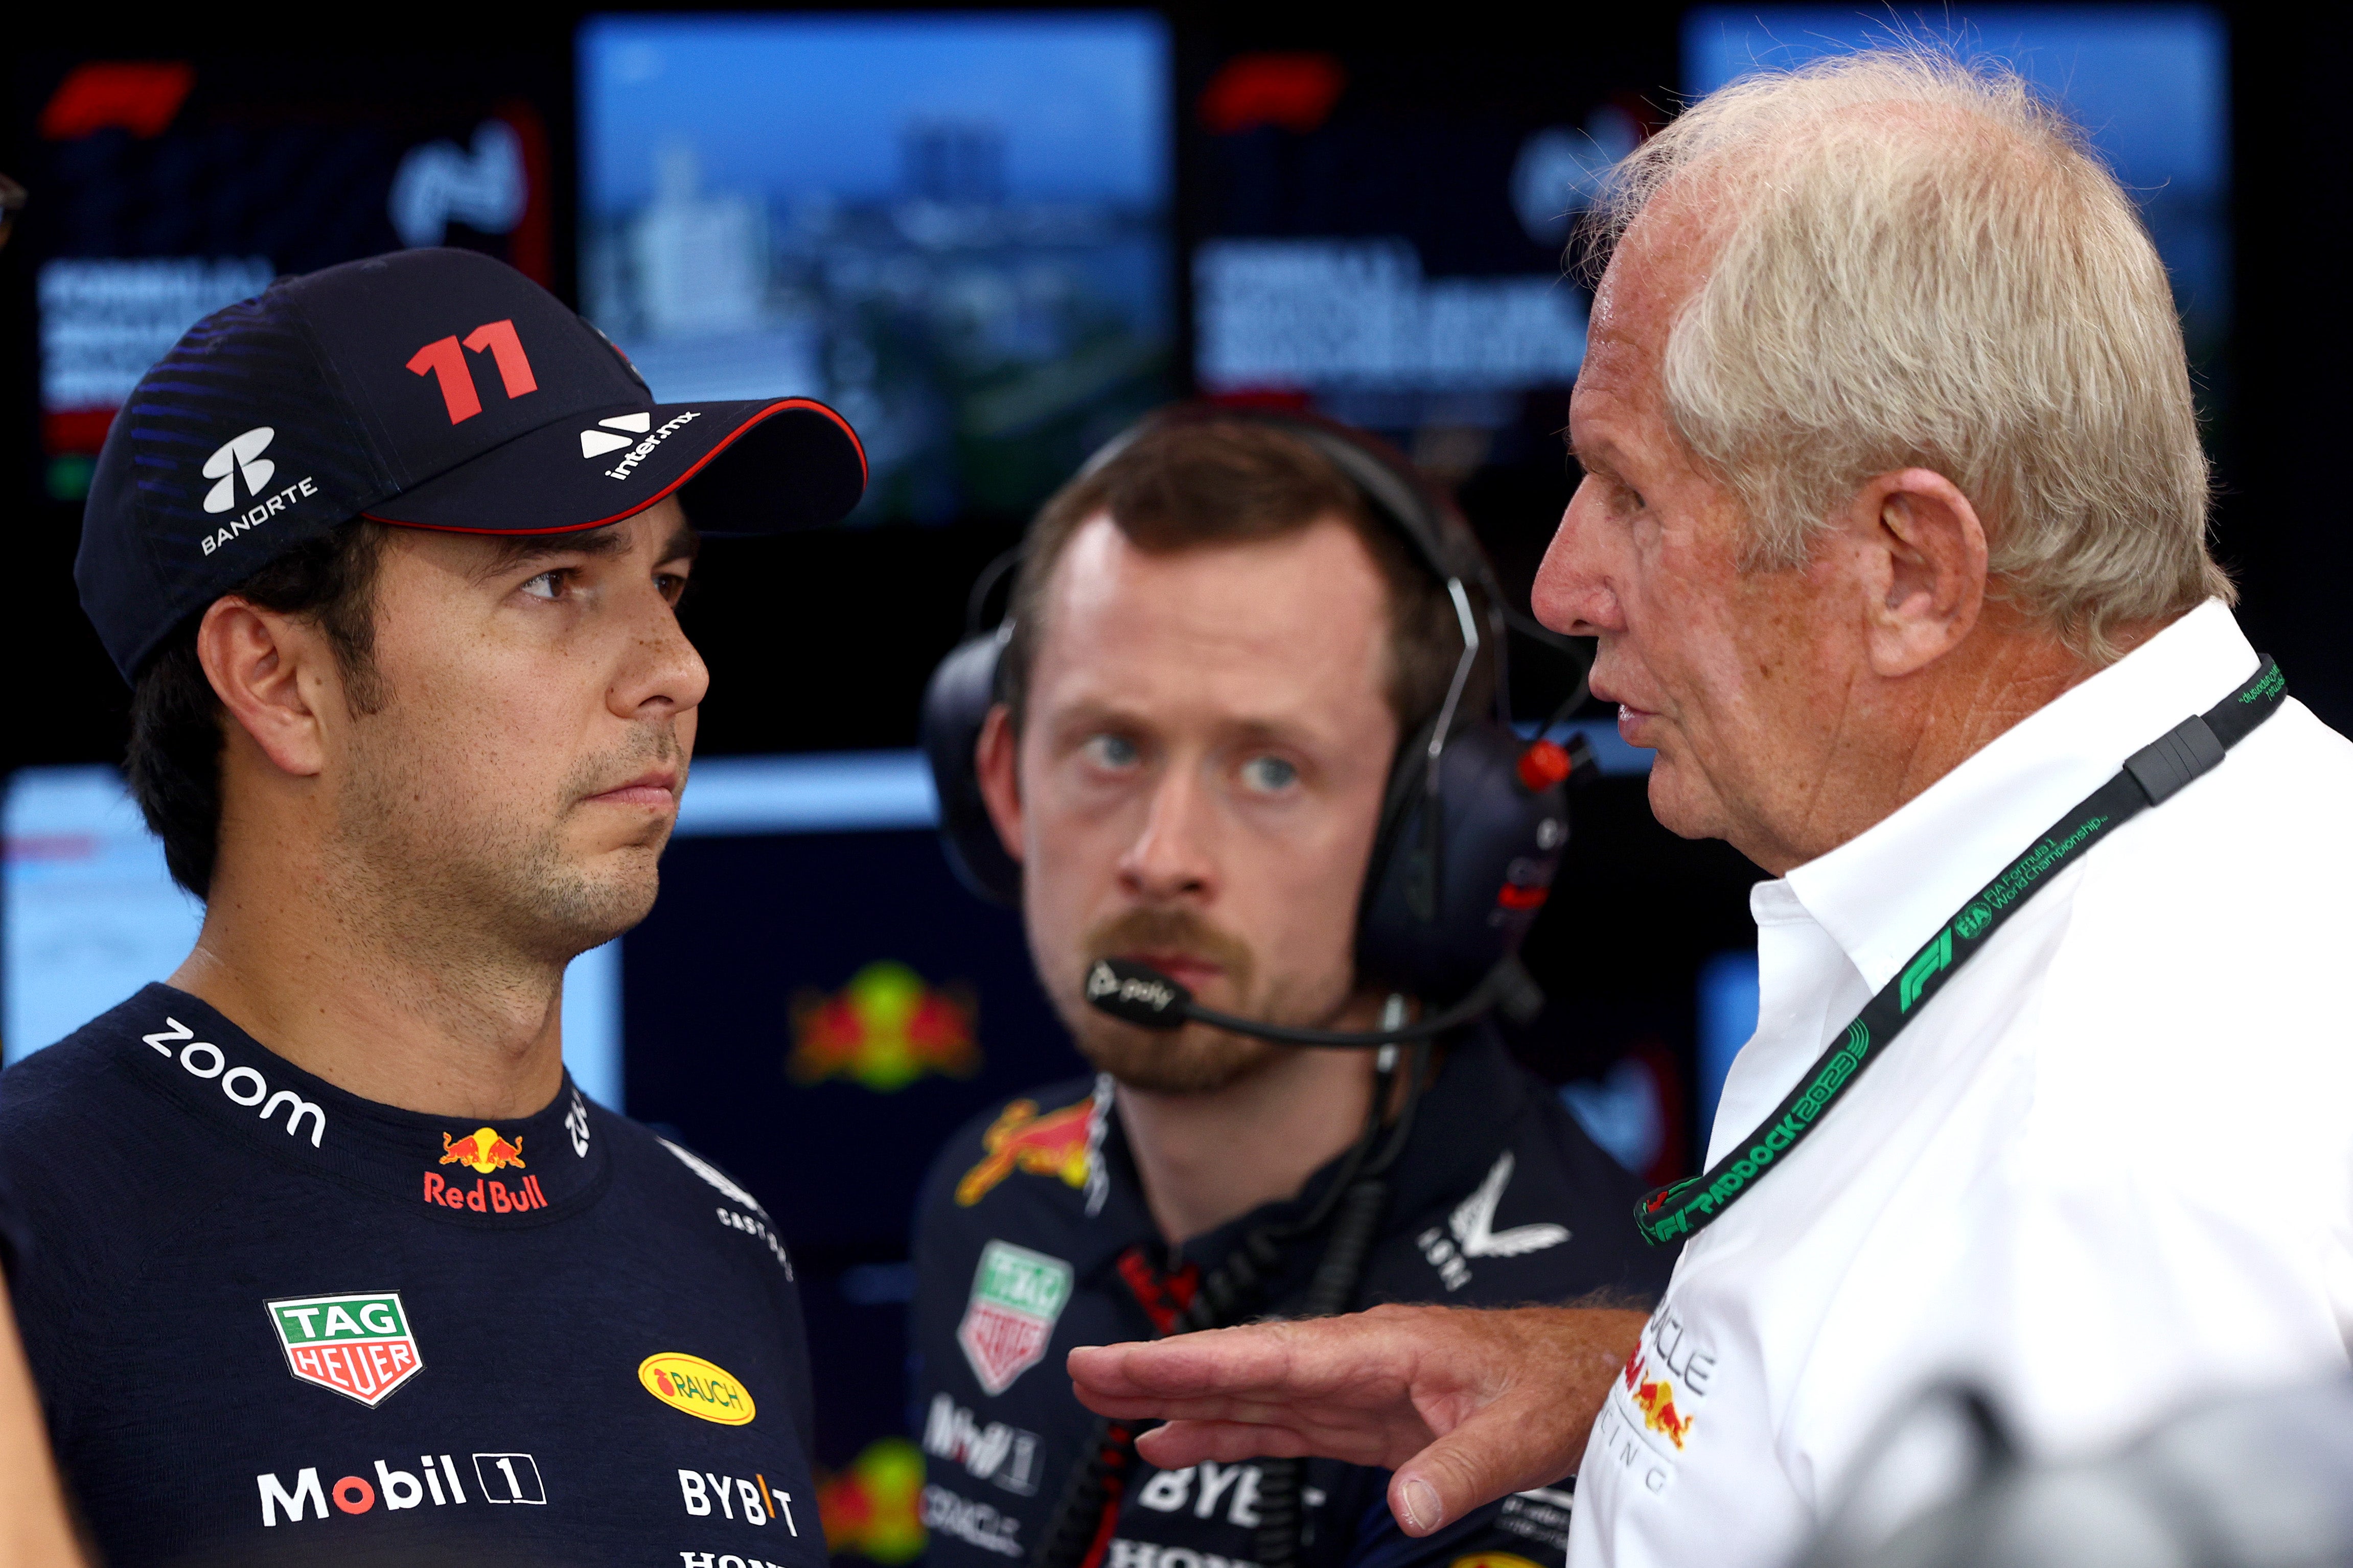 Helmut Marko has received a written warning from the FIA after his comments about Sergio Perez